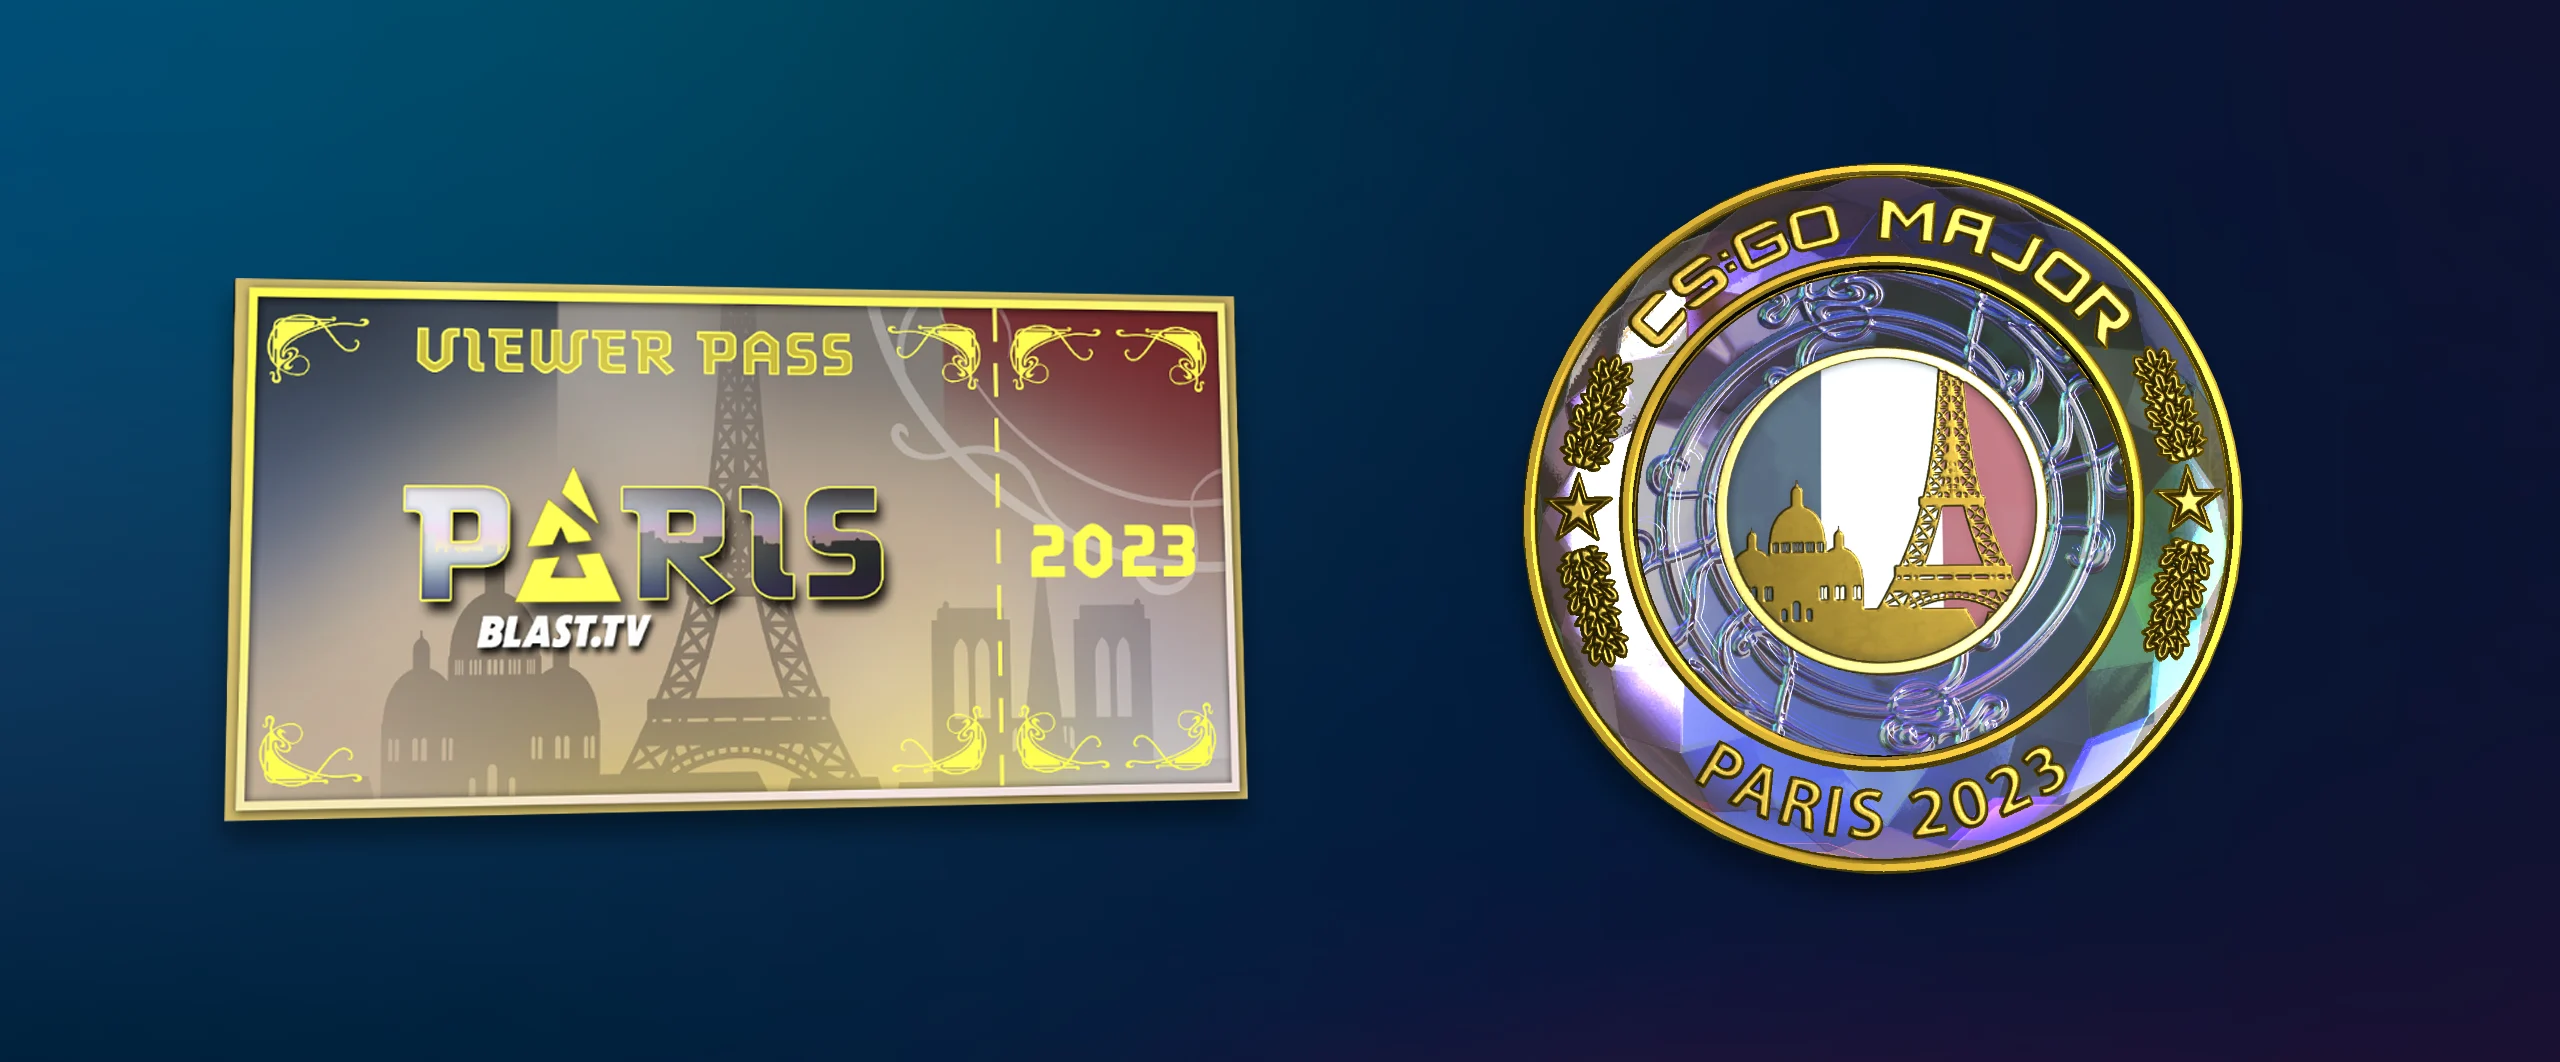 Paris 2023 Viewer Pass and Event Coin